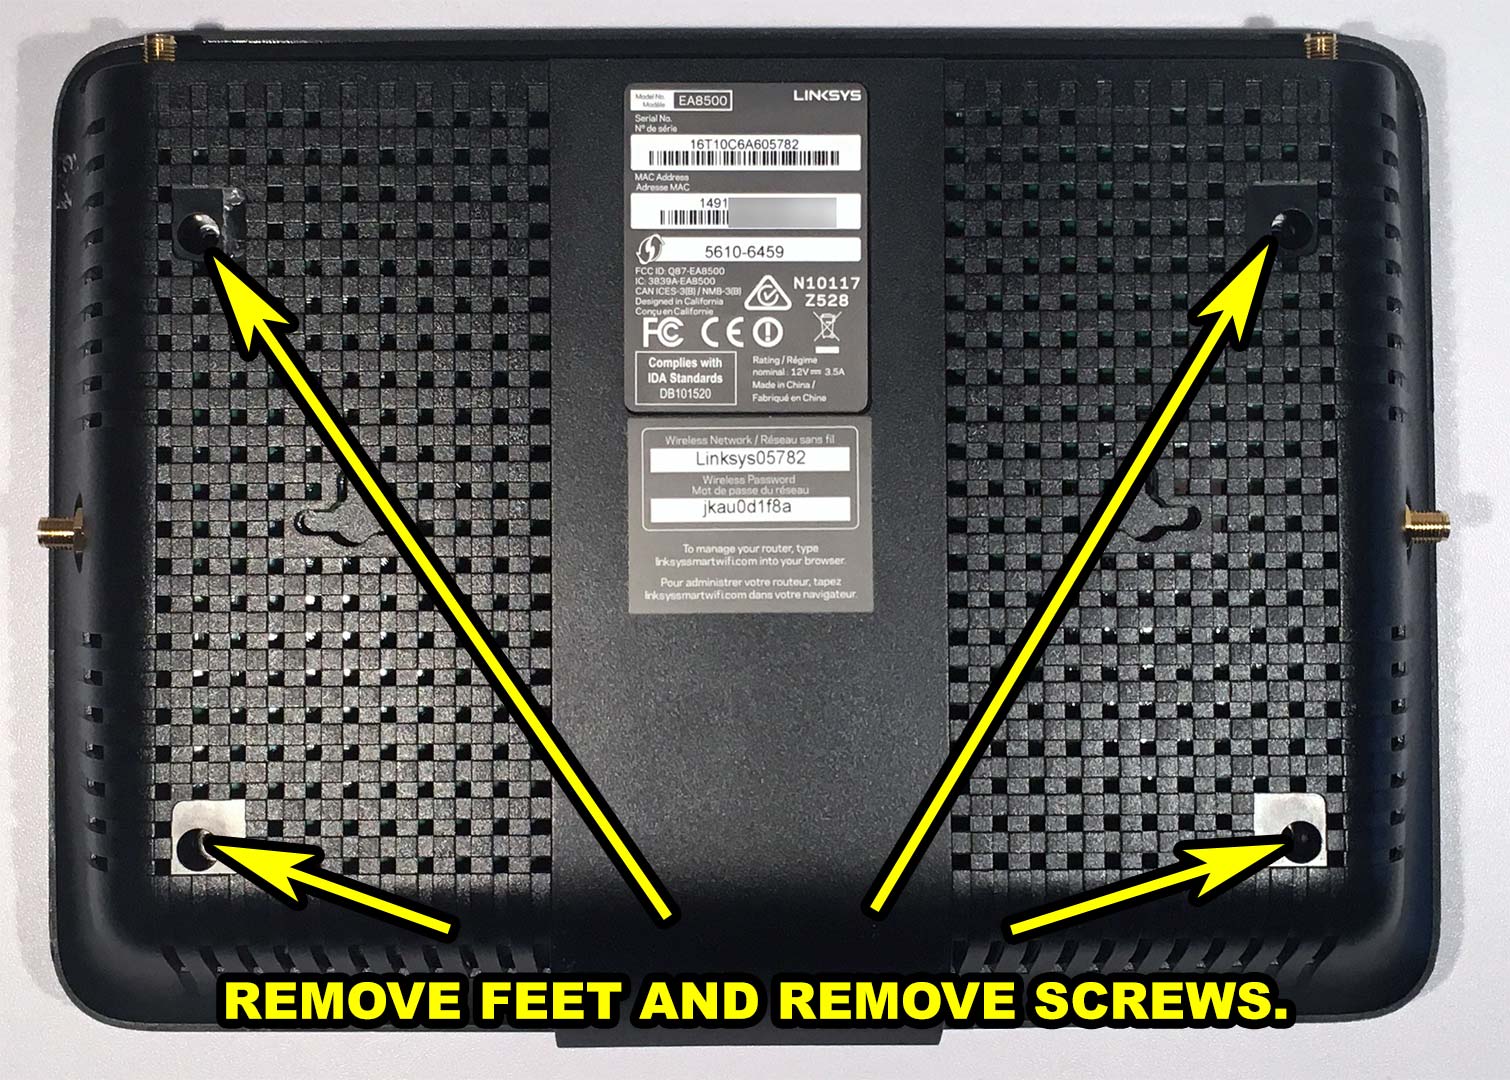 Removing feet and screws on the linksys E8500 router.